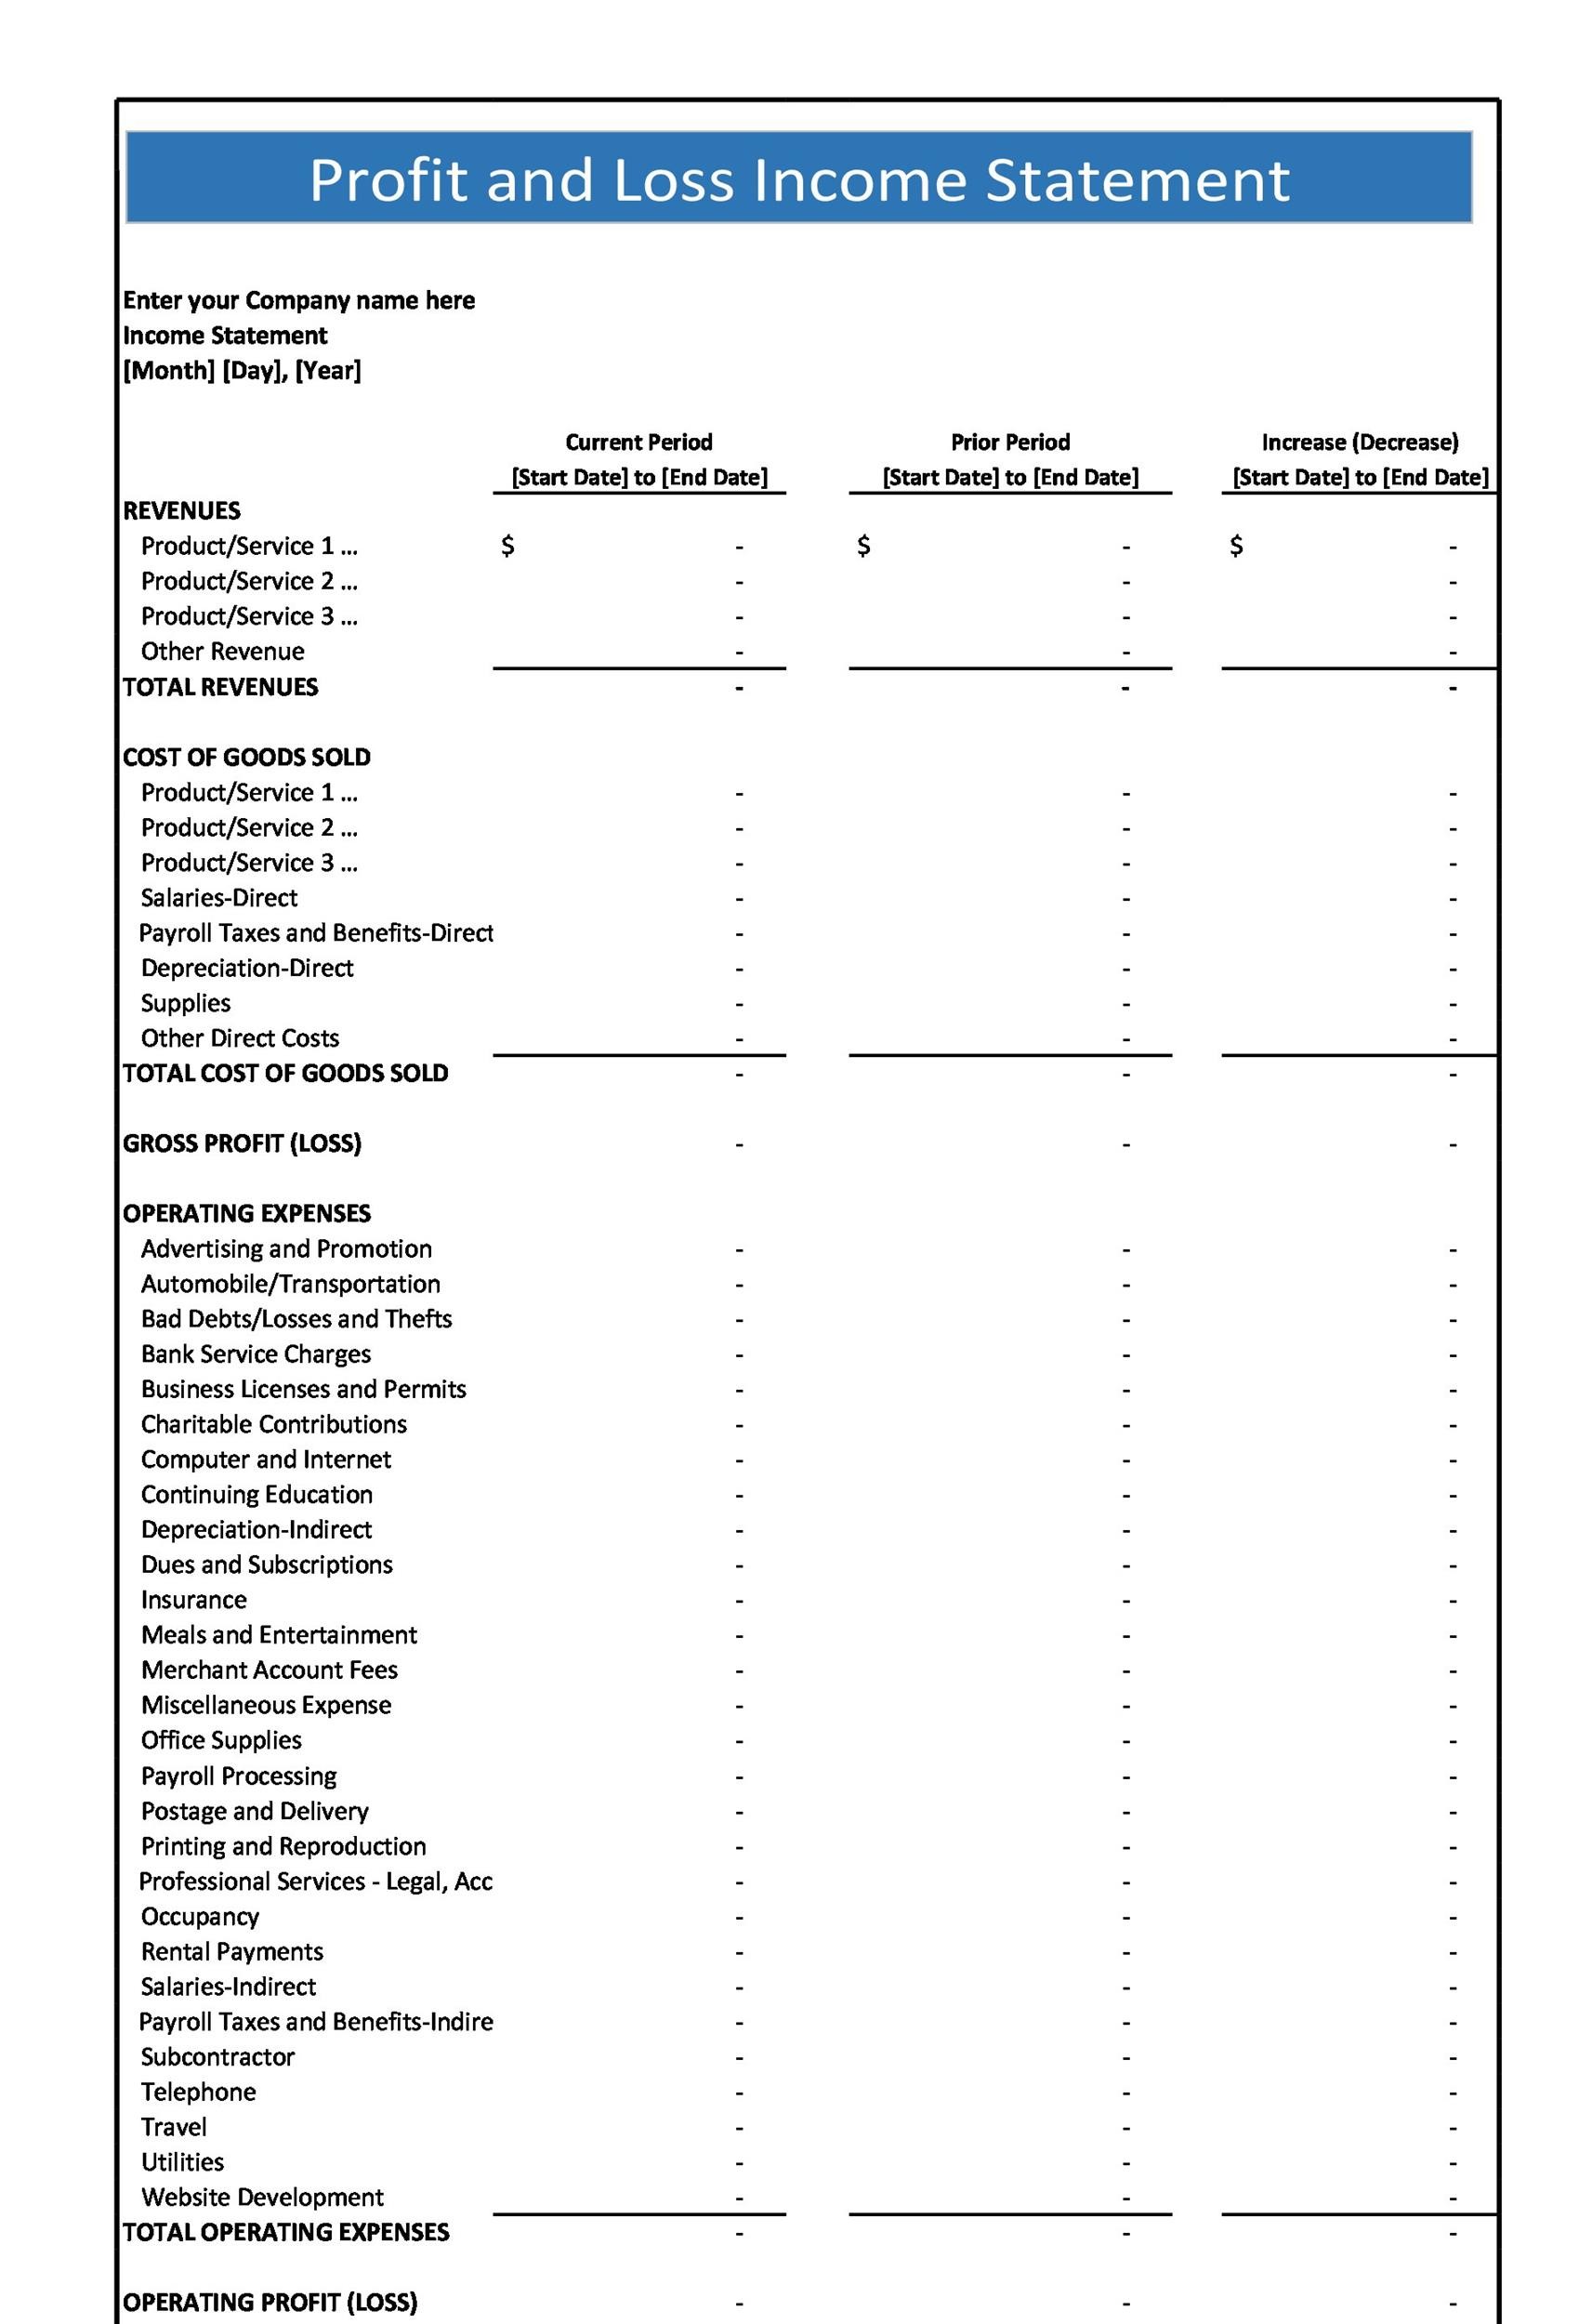 Free Profit and Loss Statement Template 07